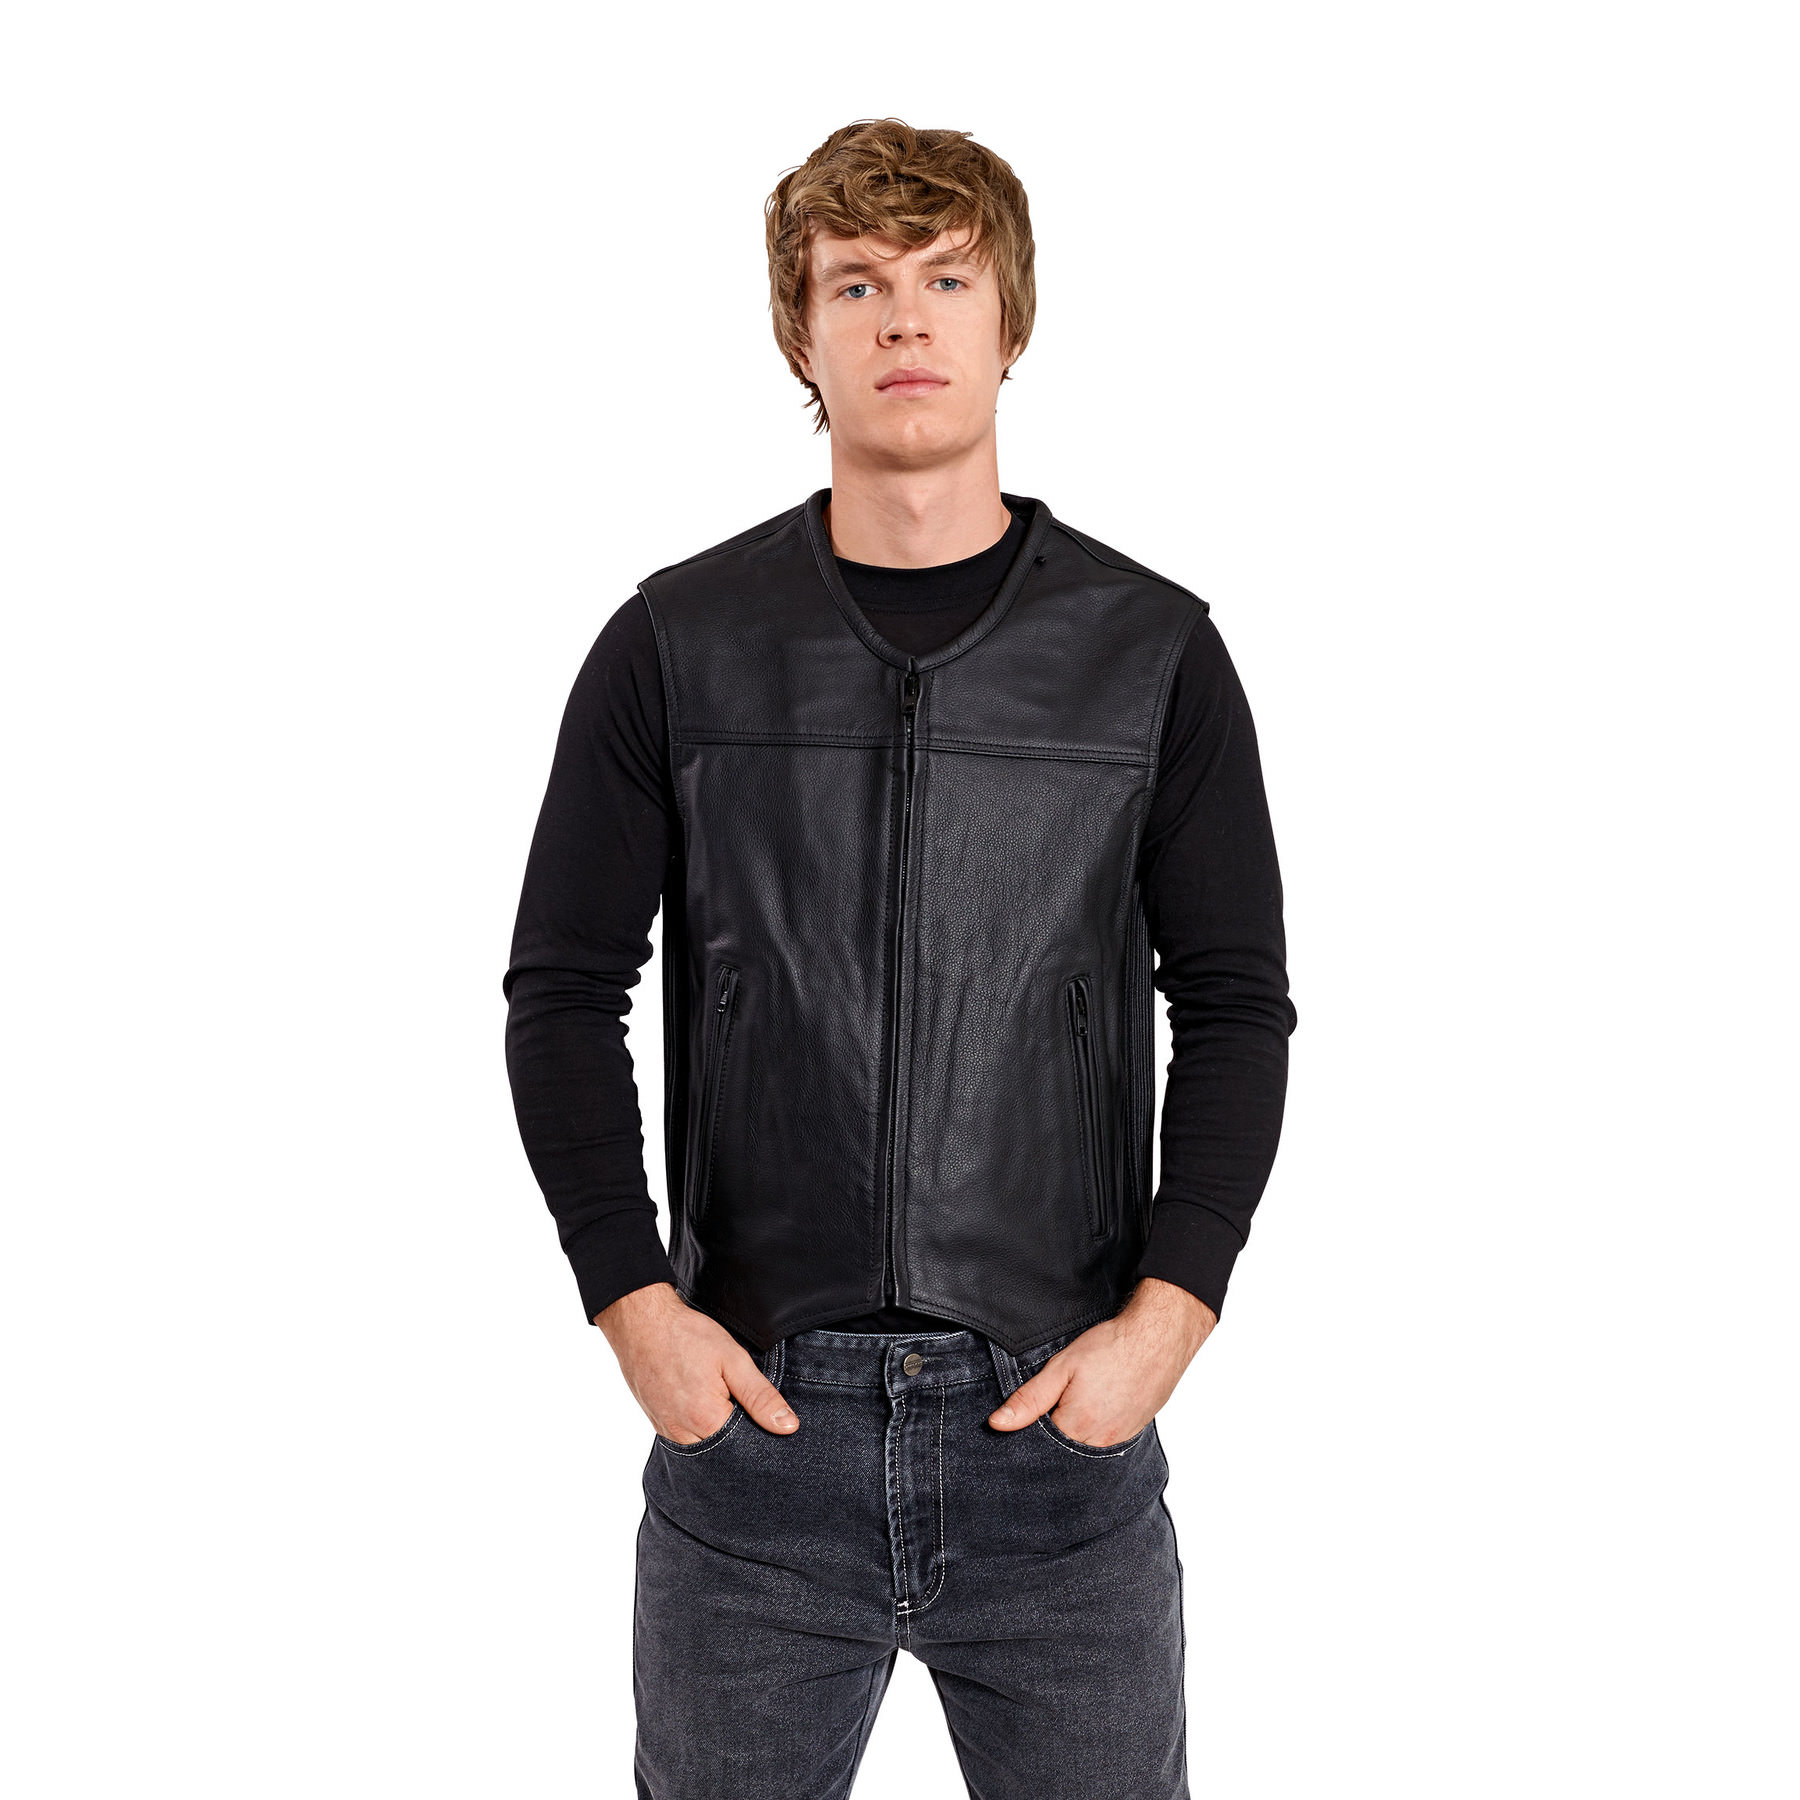 Buy Highway 1 leather vest | Louis motorcycle clothing and technology